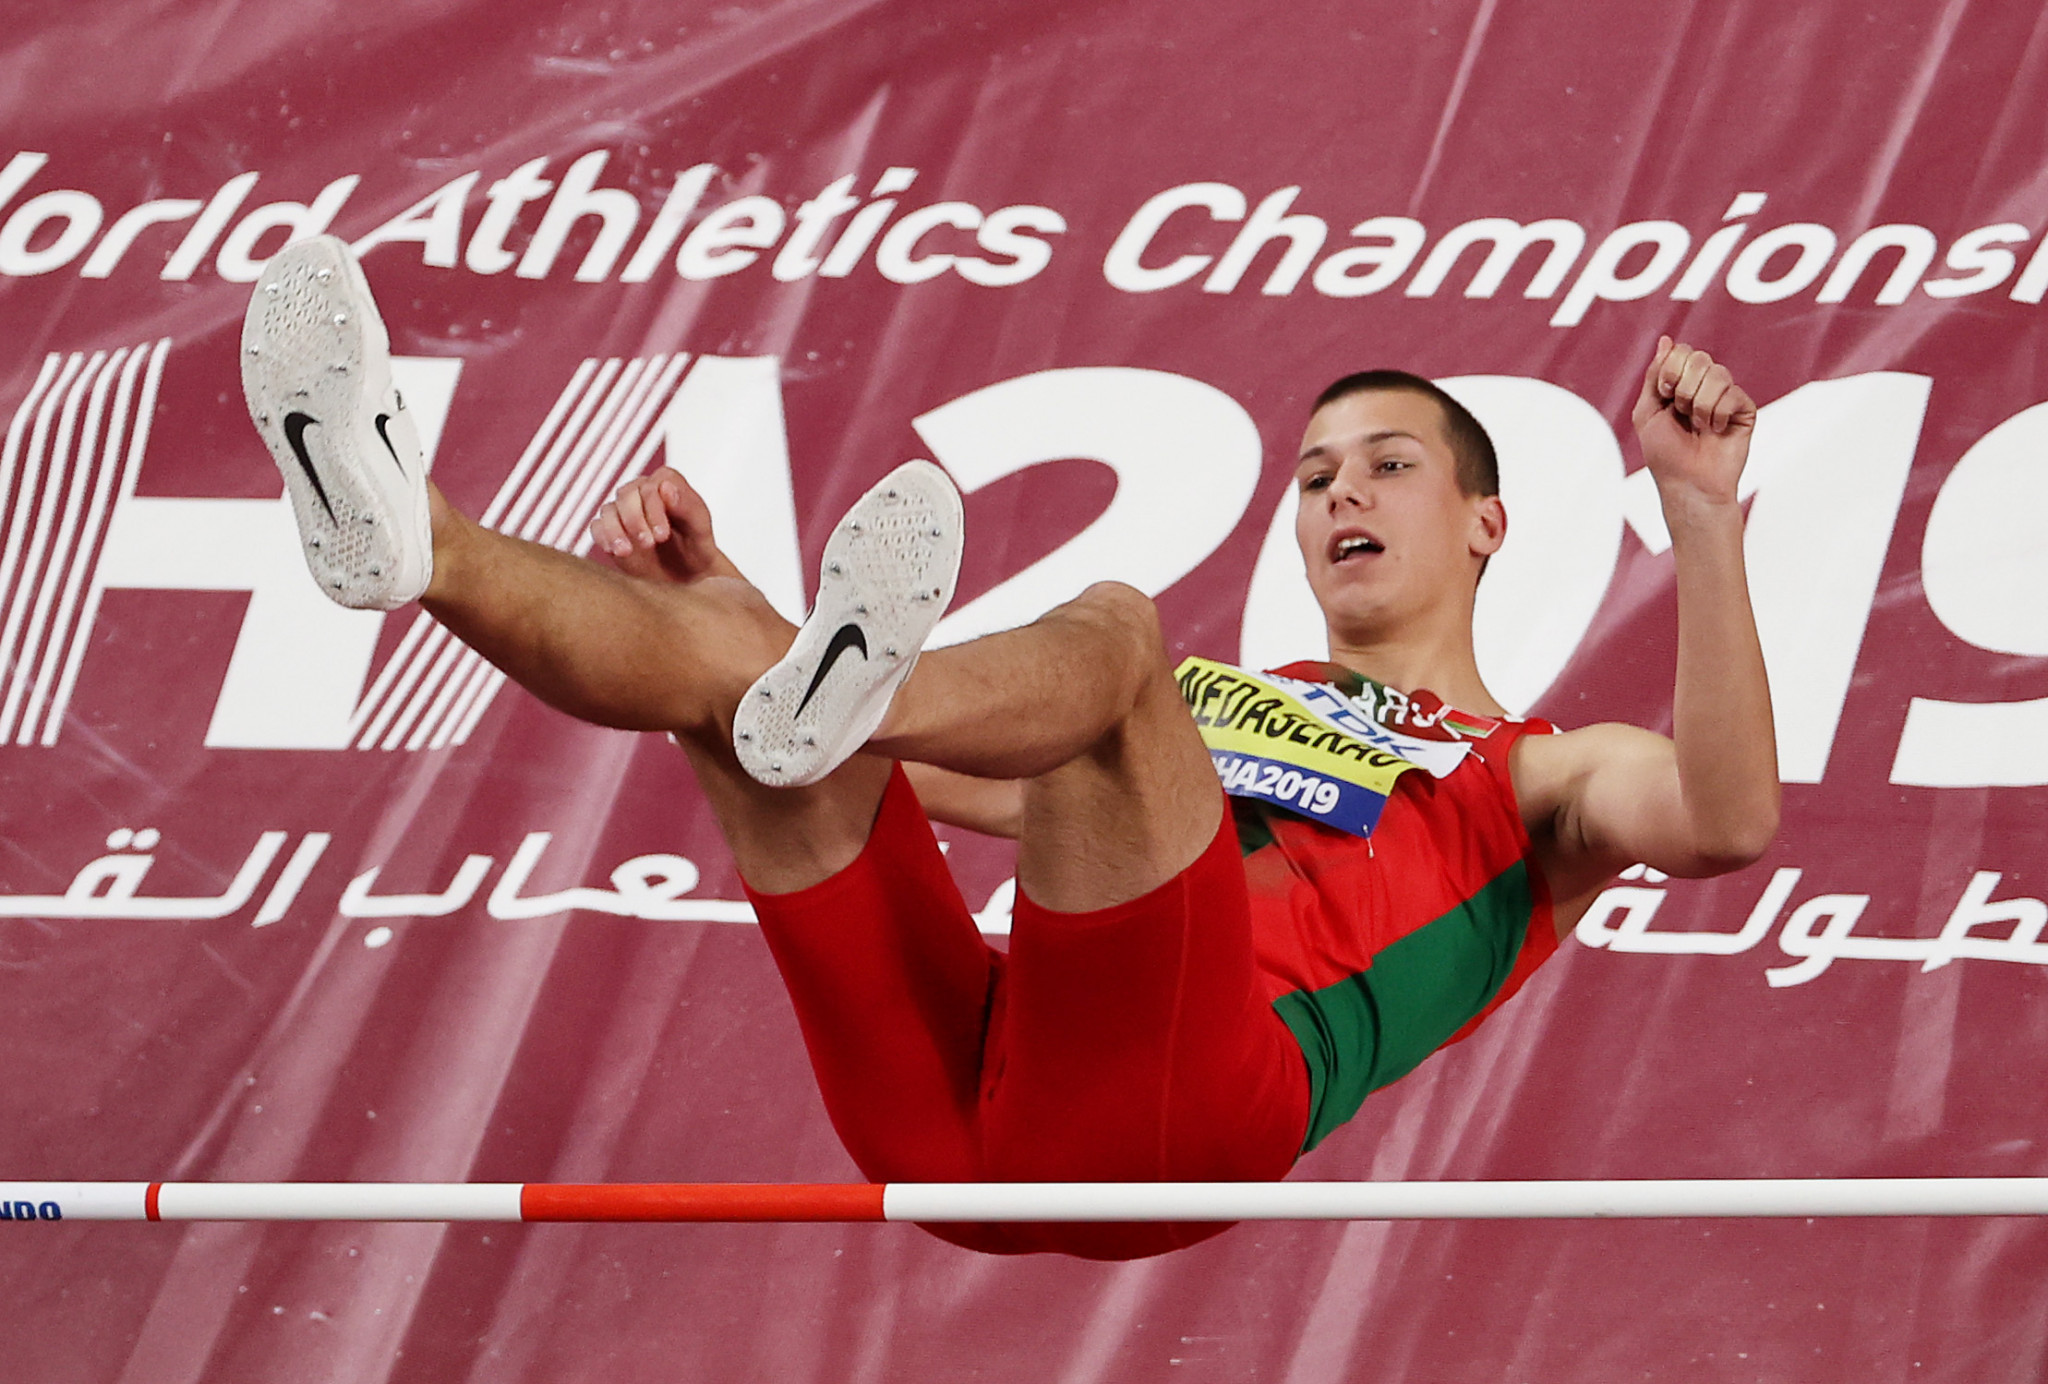 Dzmitry Nabokau competed for Belarus at this year's iAAF World Championships in Doha